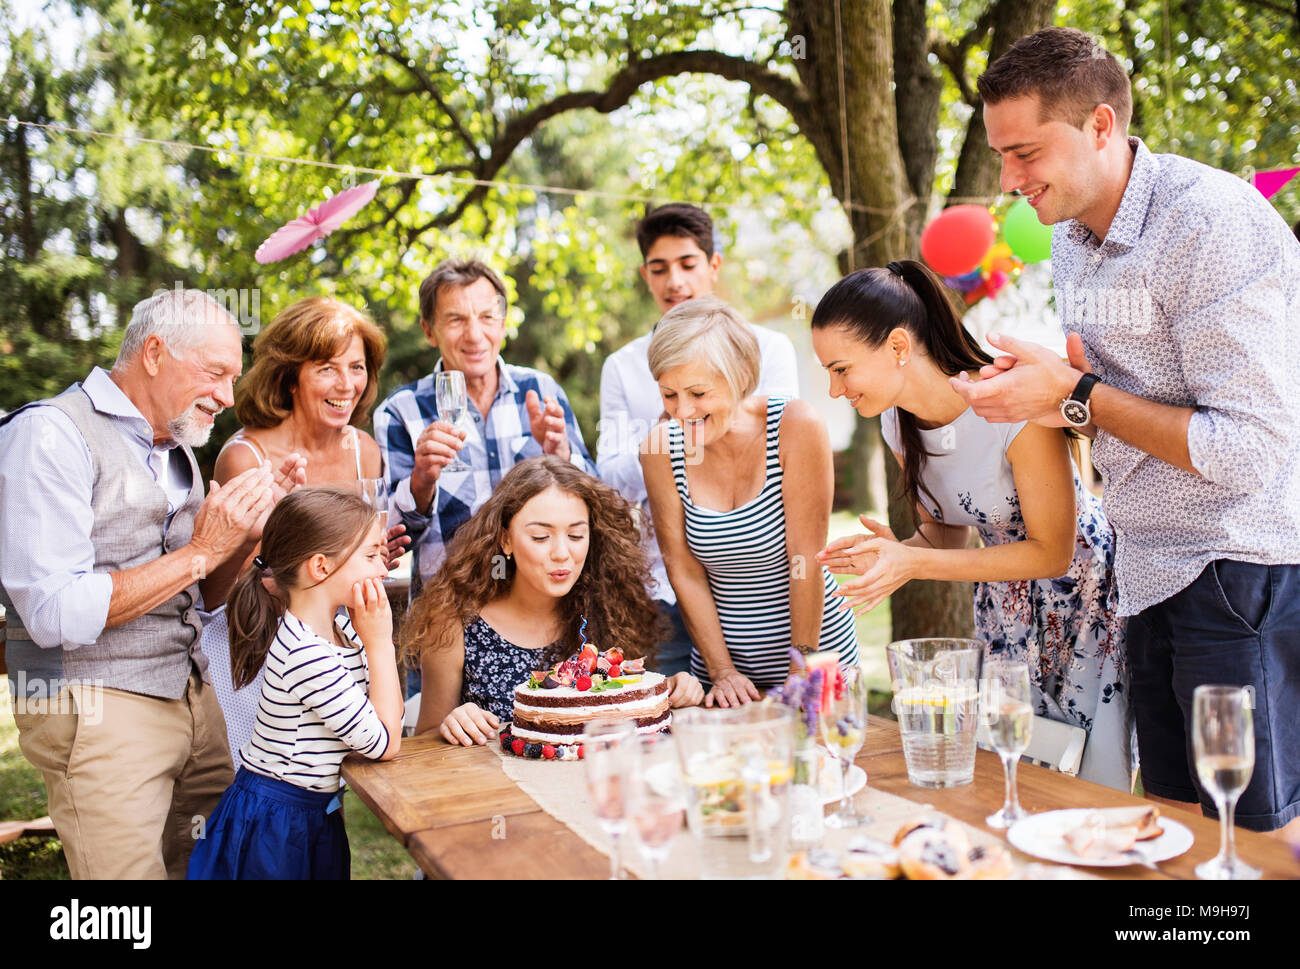 Family celebration outside in the backyard. Big garden party. Birthday party. A teenage girl with a birthday cake. Stock Photo